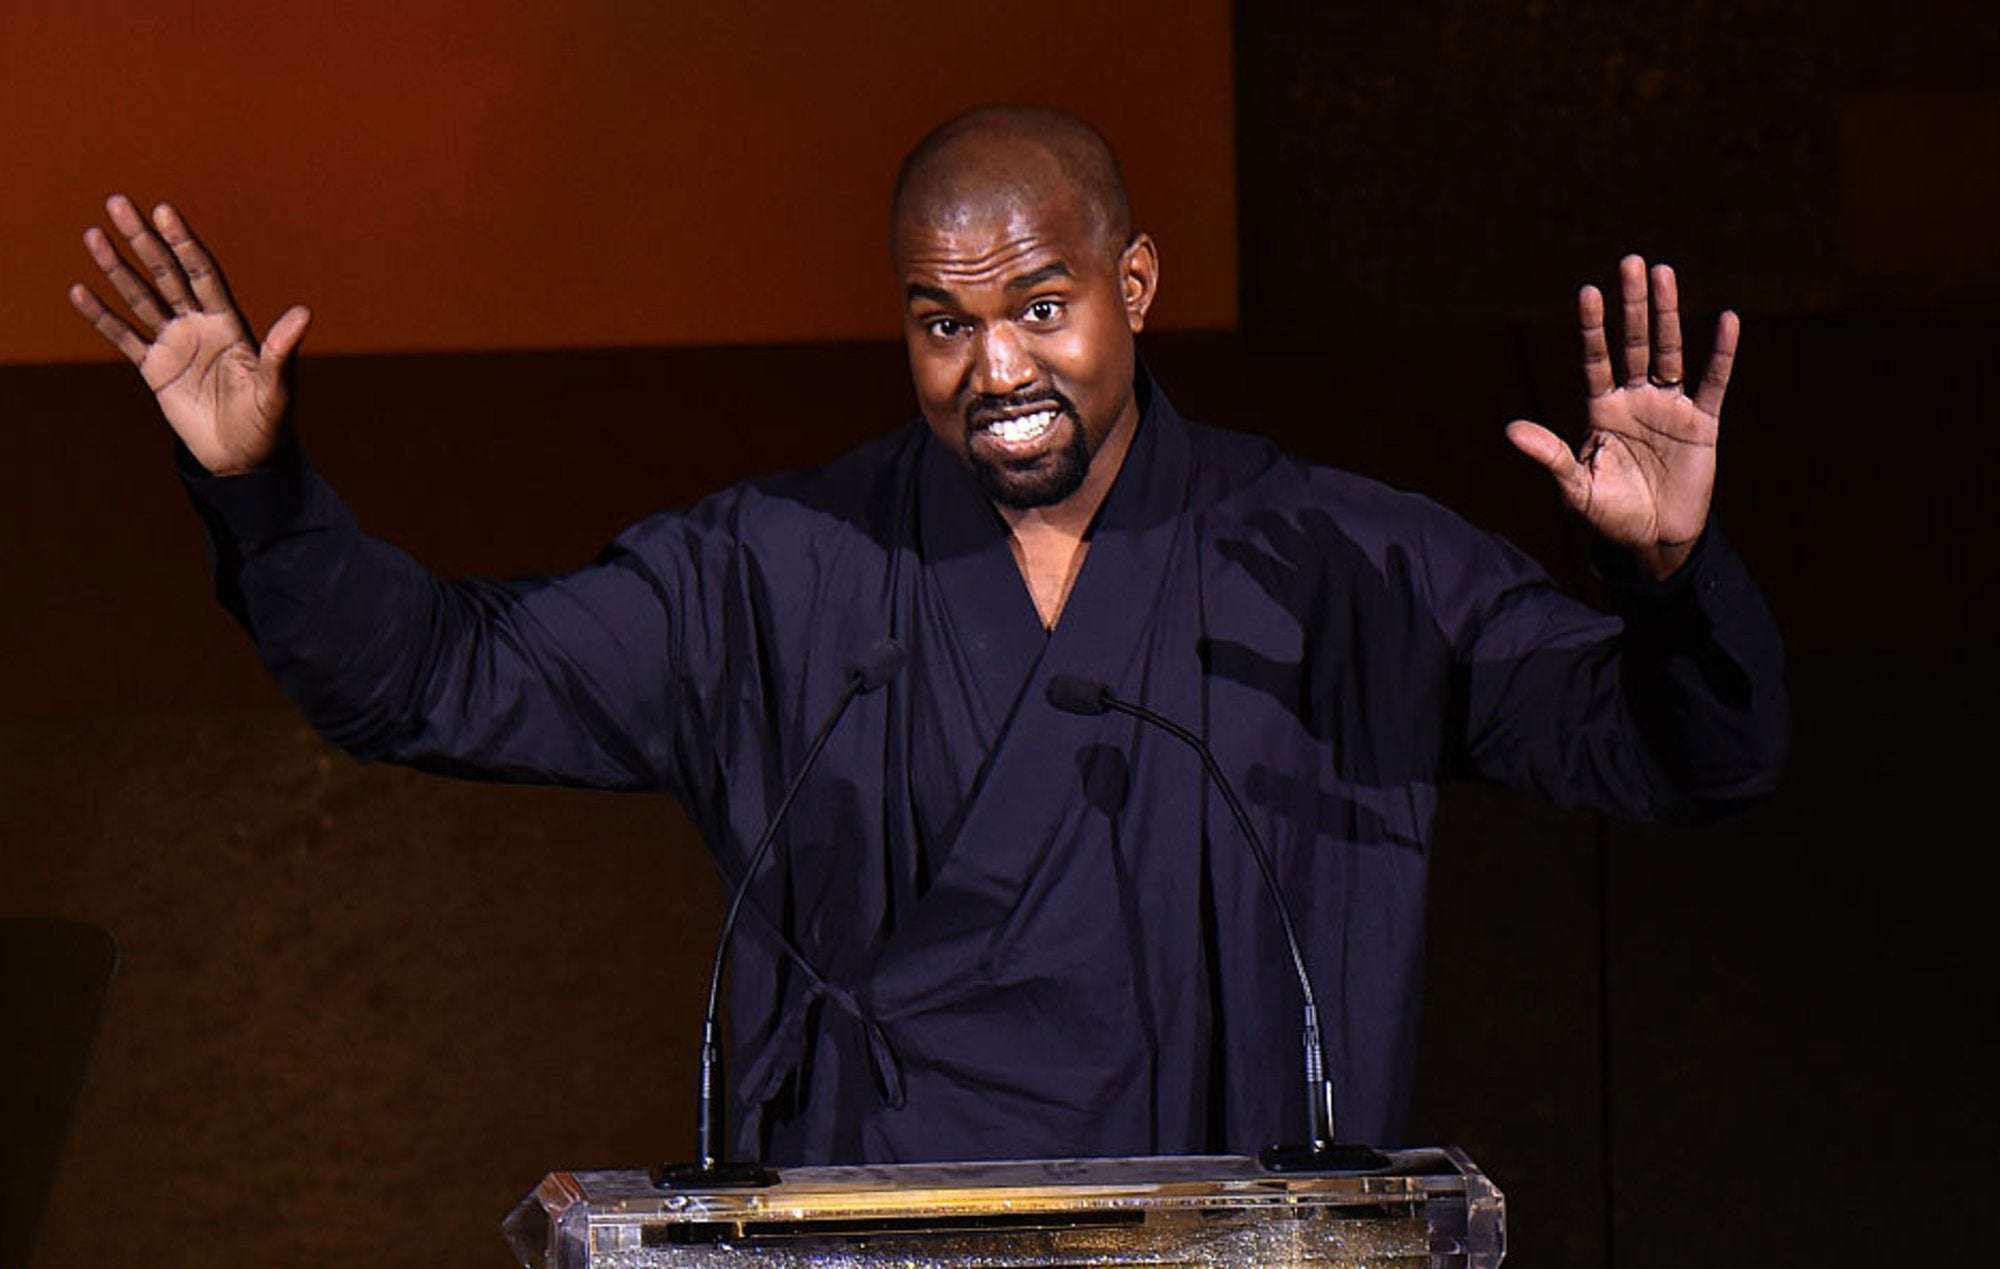 image for Kanye West says he has had COVID-19, calls vaccines “the mark of the beast”